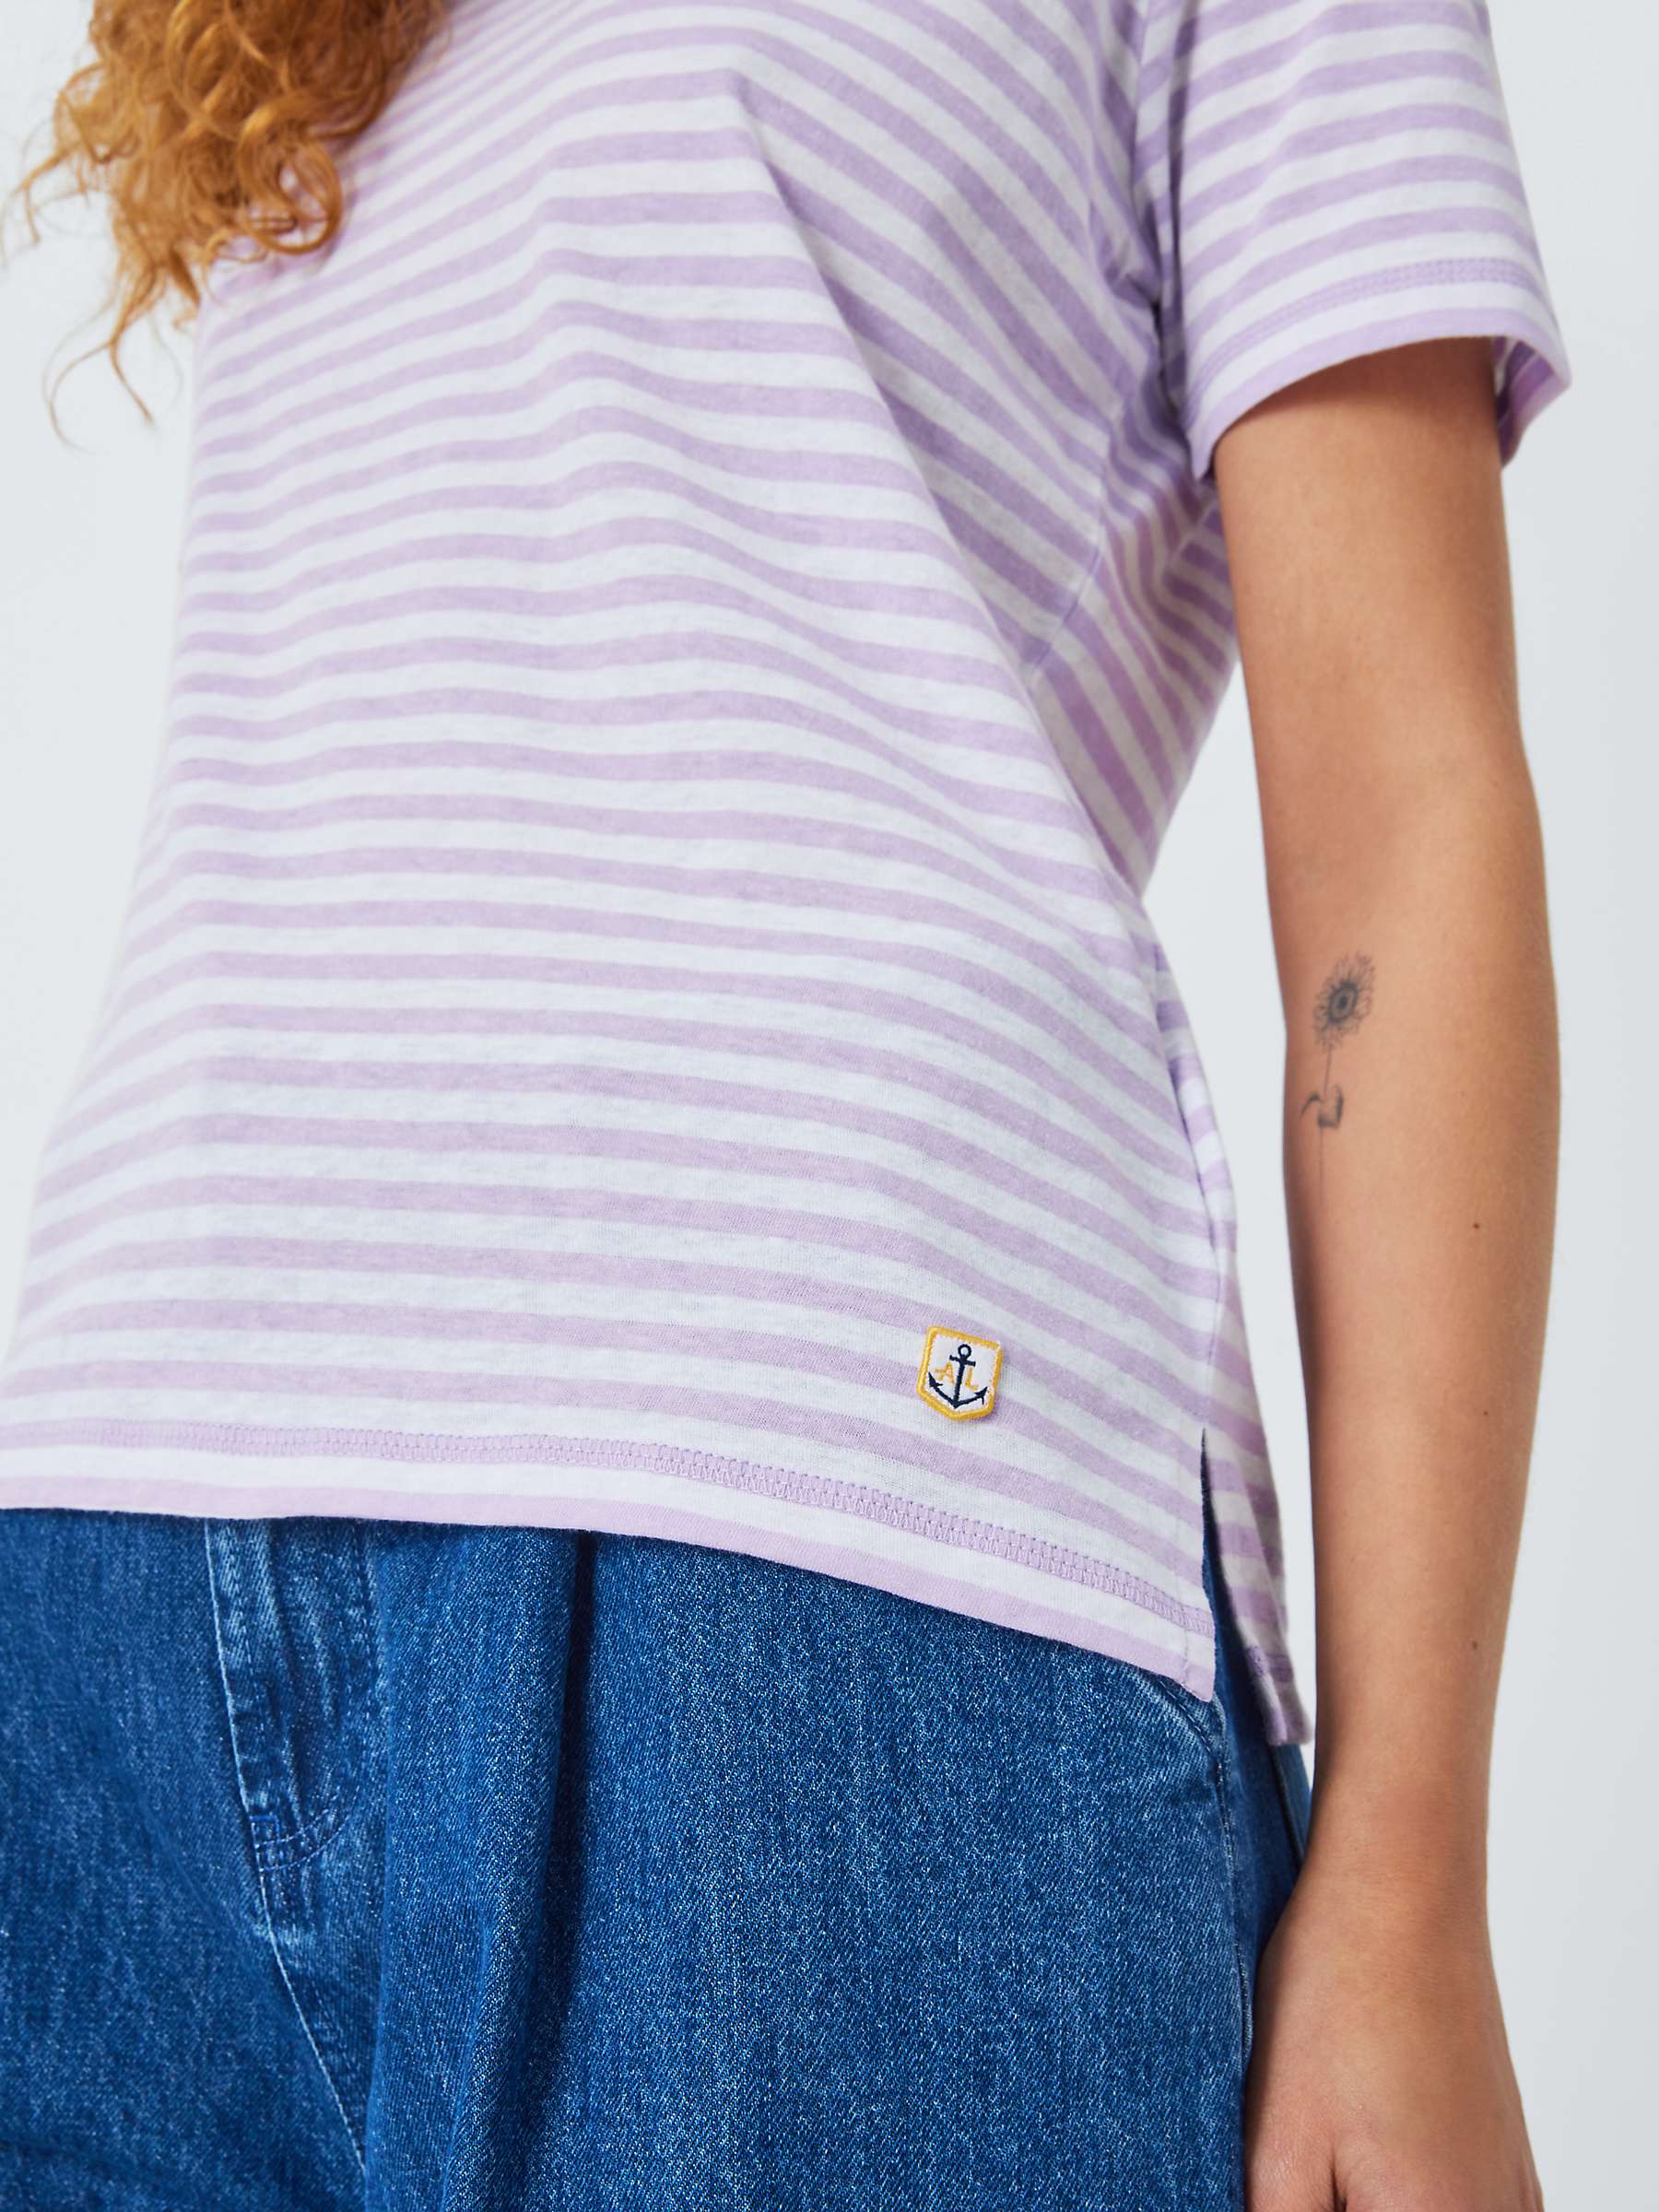 Buy Armor Lux Striped Lightweight Striped Jersey T-Shirt, White/Pink Online at johnlewis.com